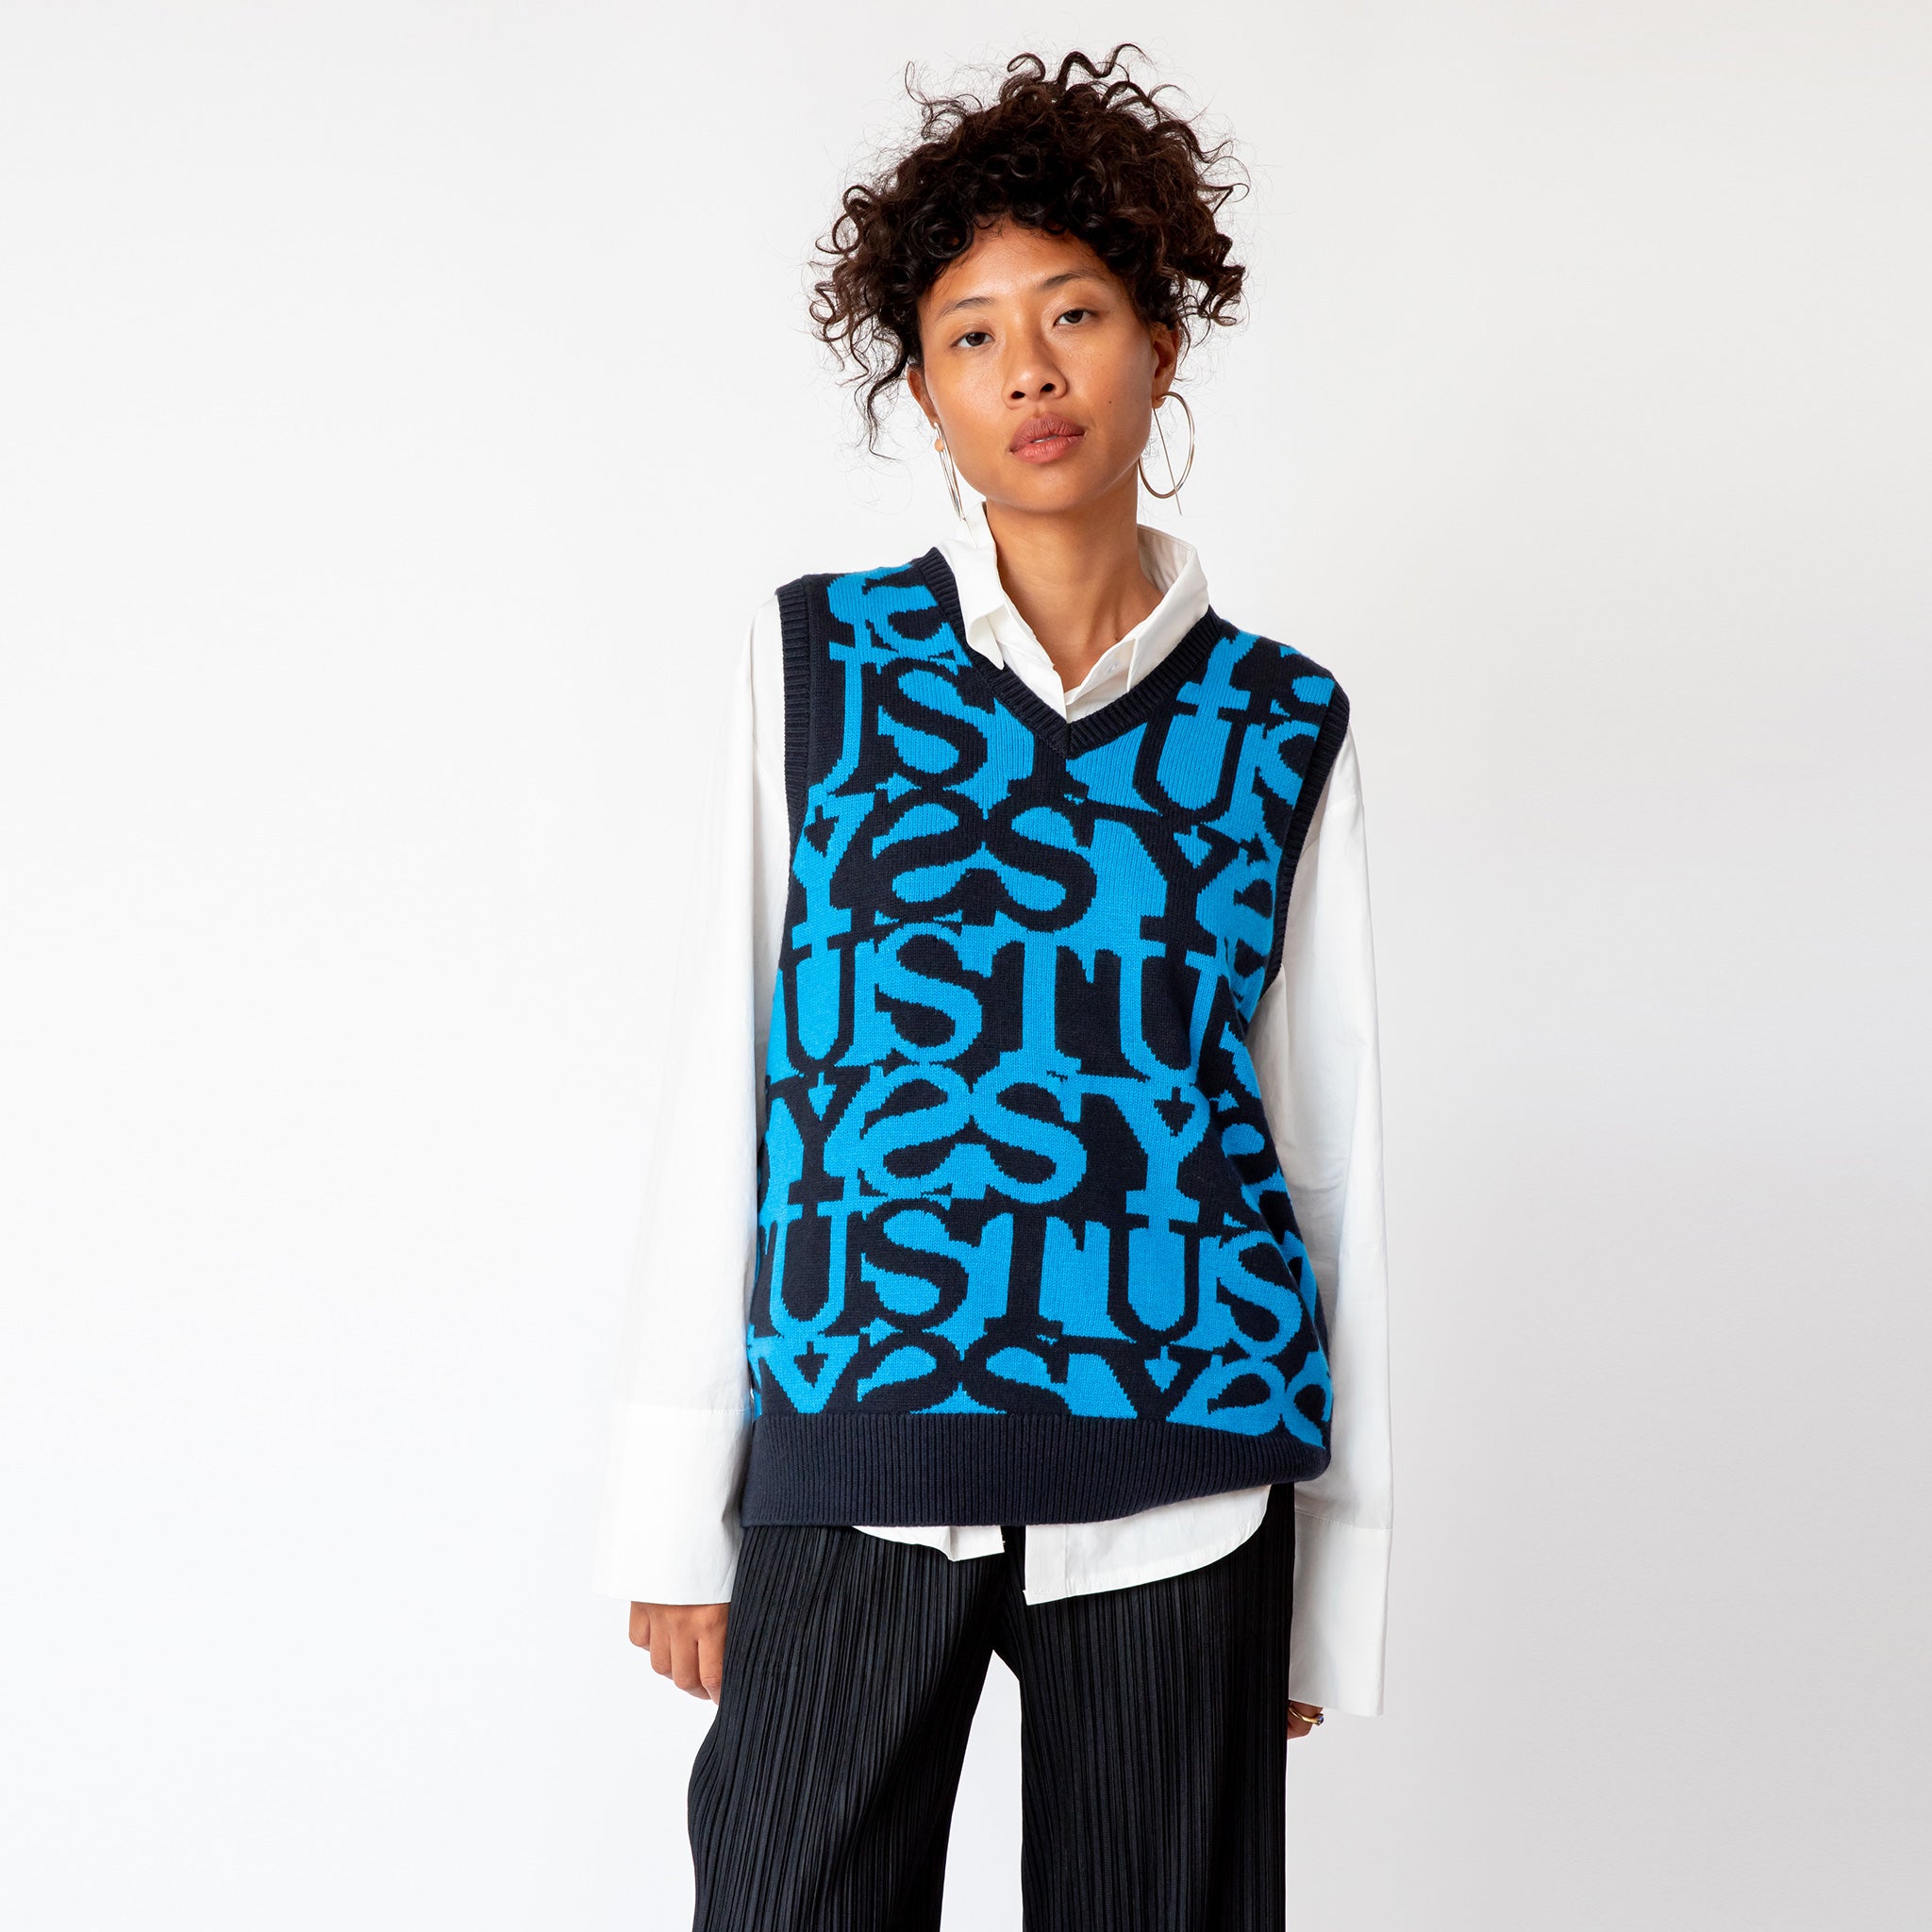 A model wearing the v-neck Stussy Stacked Sweater Vest - an oversized mens sweater vest with a blue and black allover repeating print of the word STUSSY.